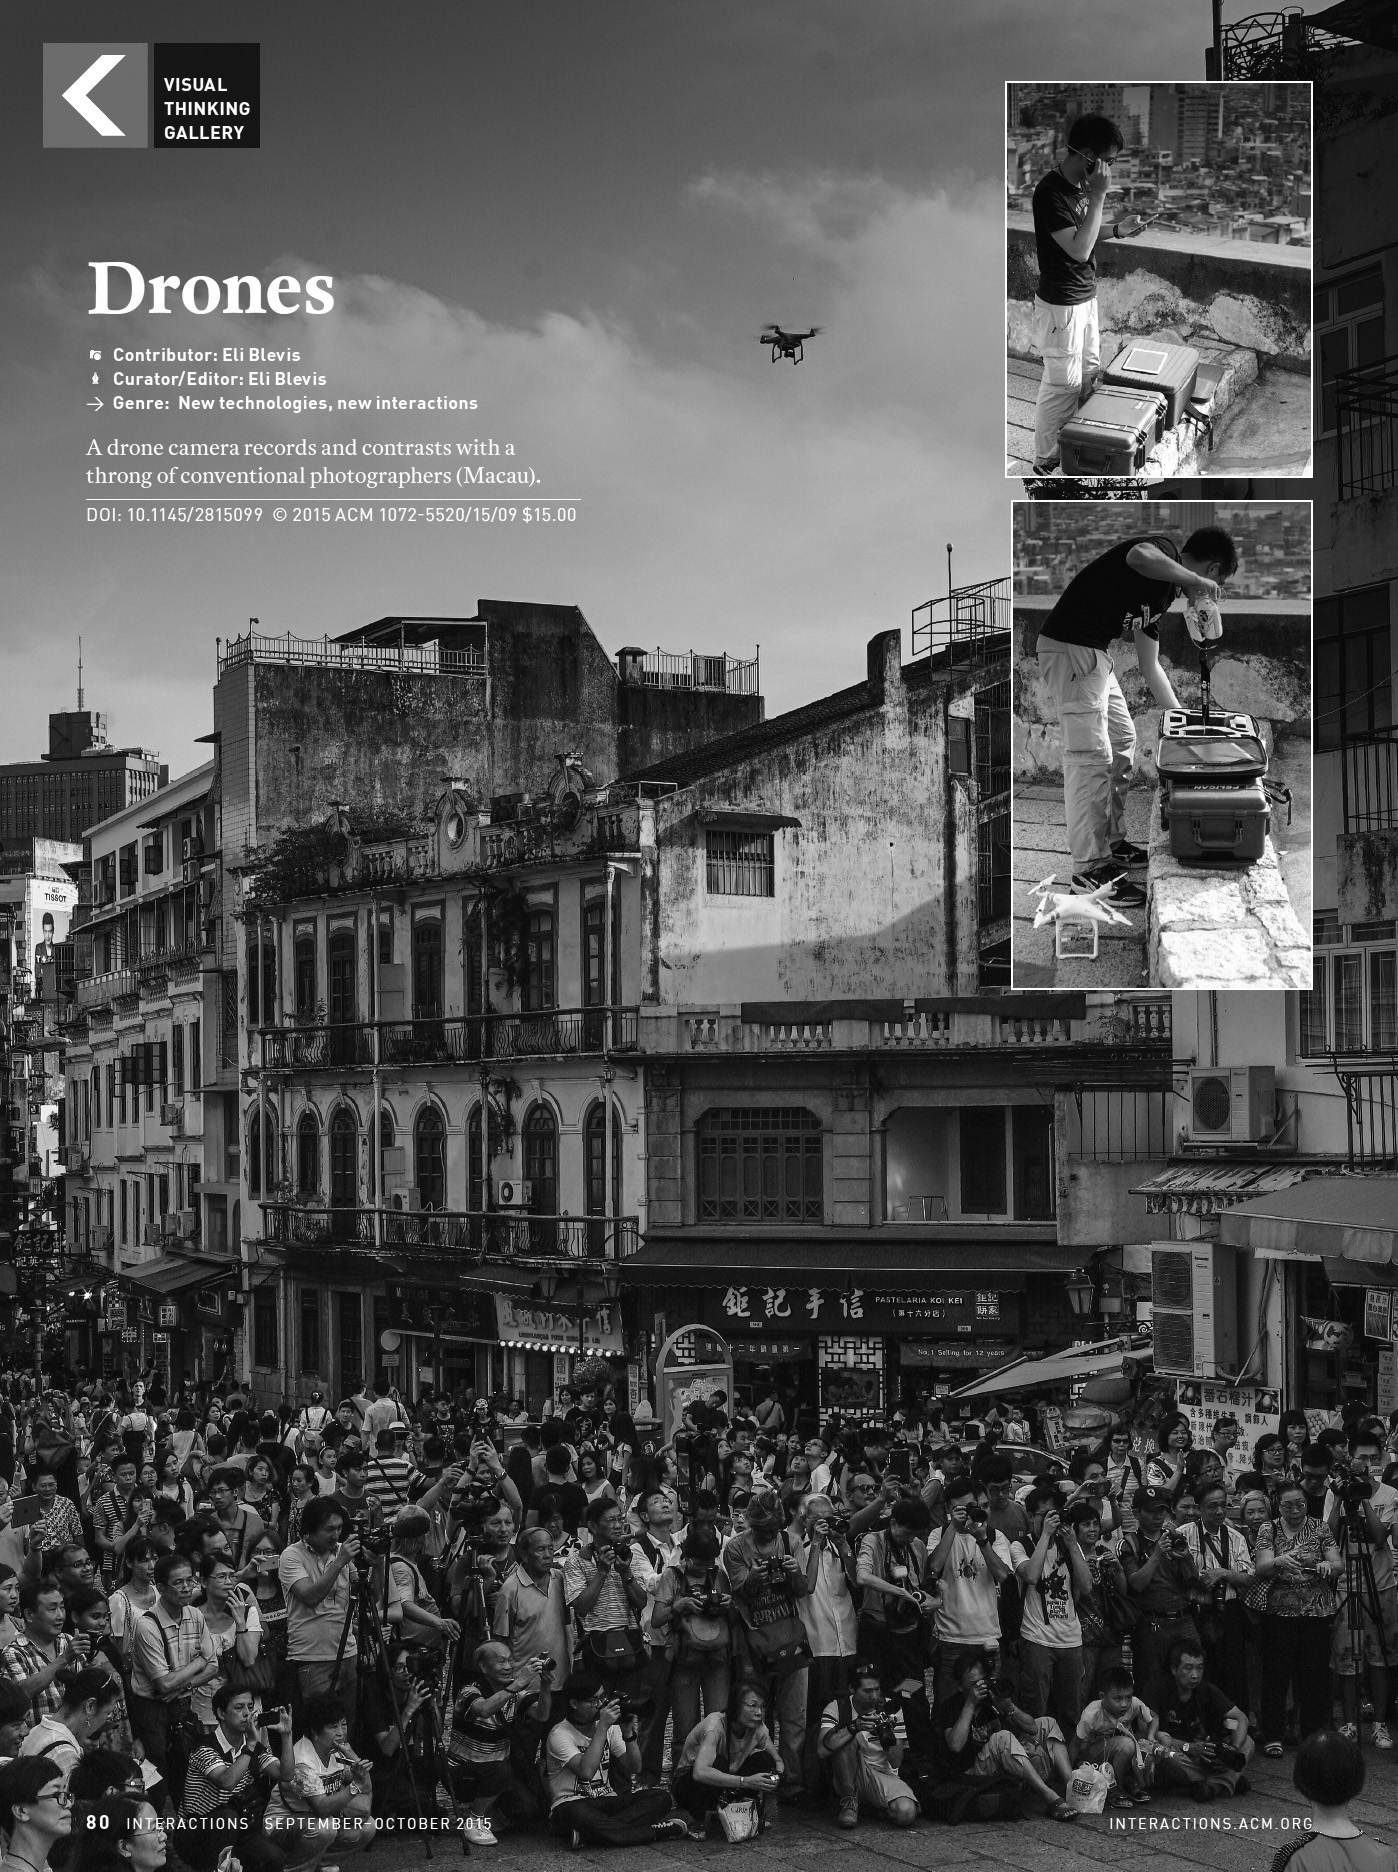 Photograph: Drone above a crowd